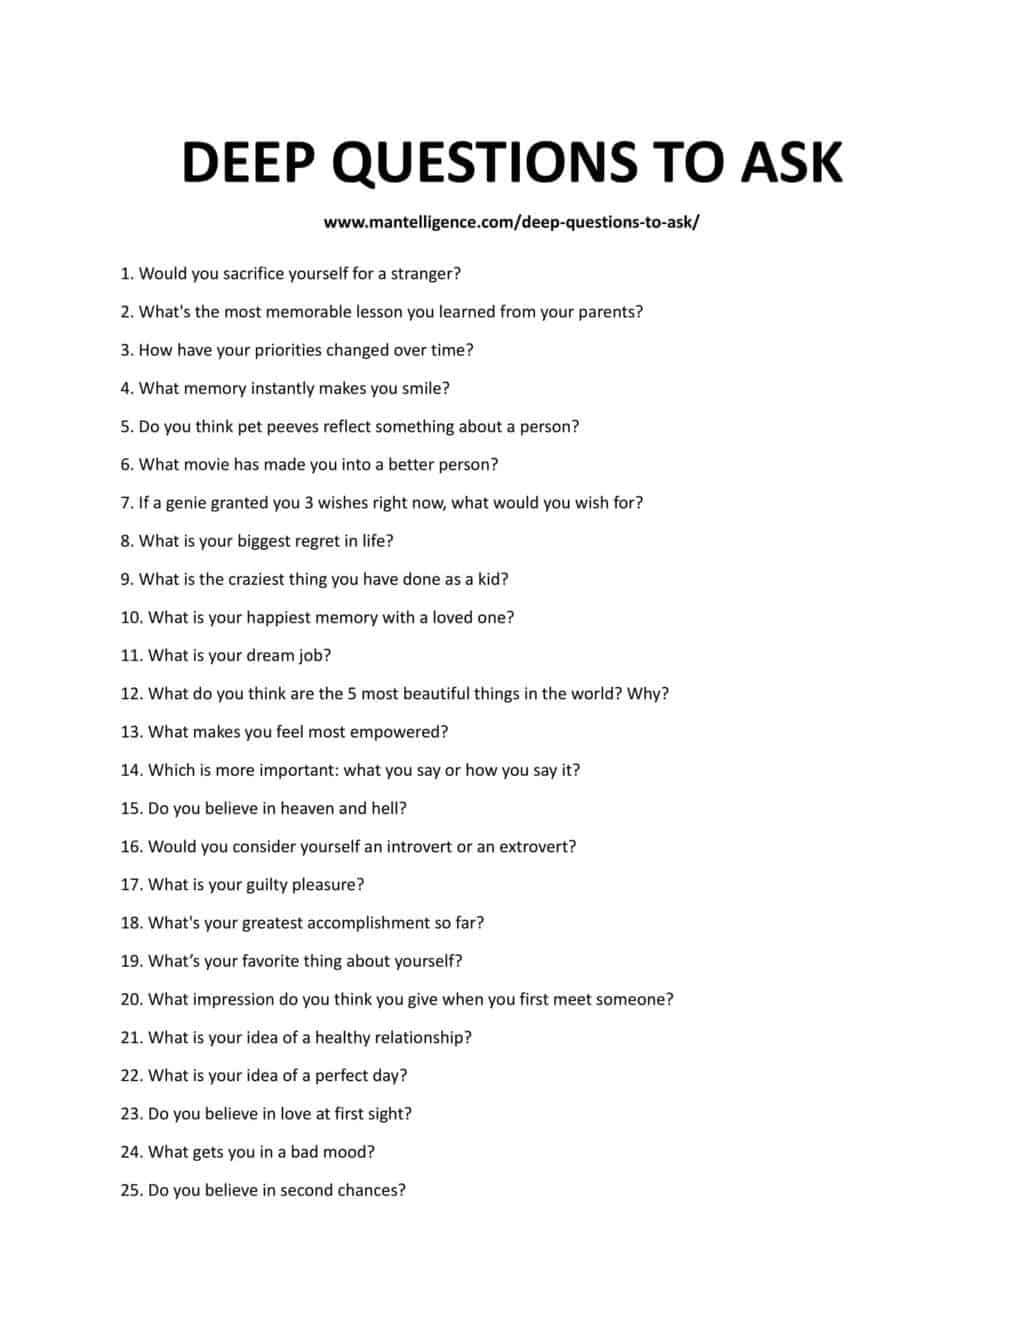 77 Deep Questions to Ask - Best Way To Know Them Deeper Quickly